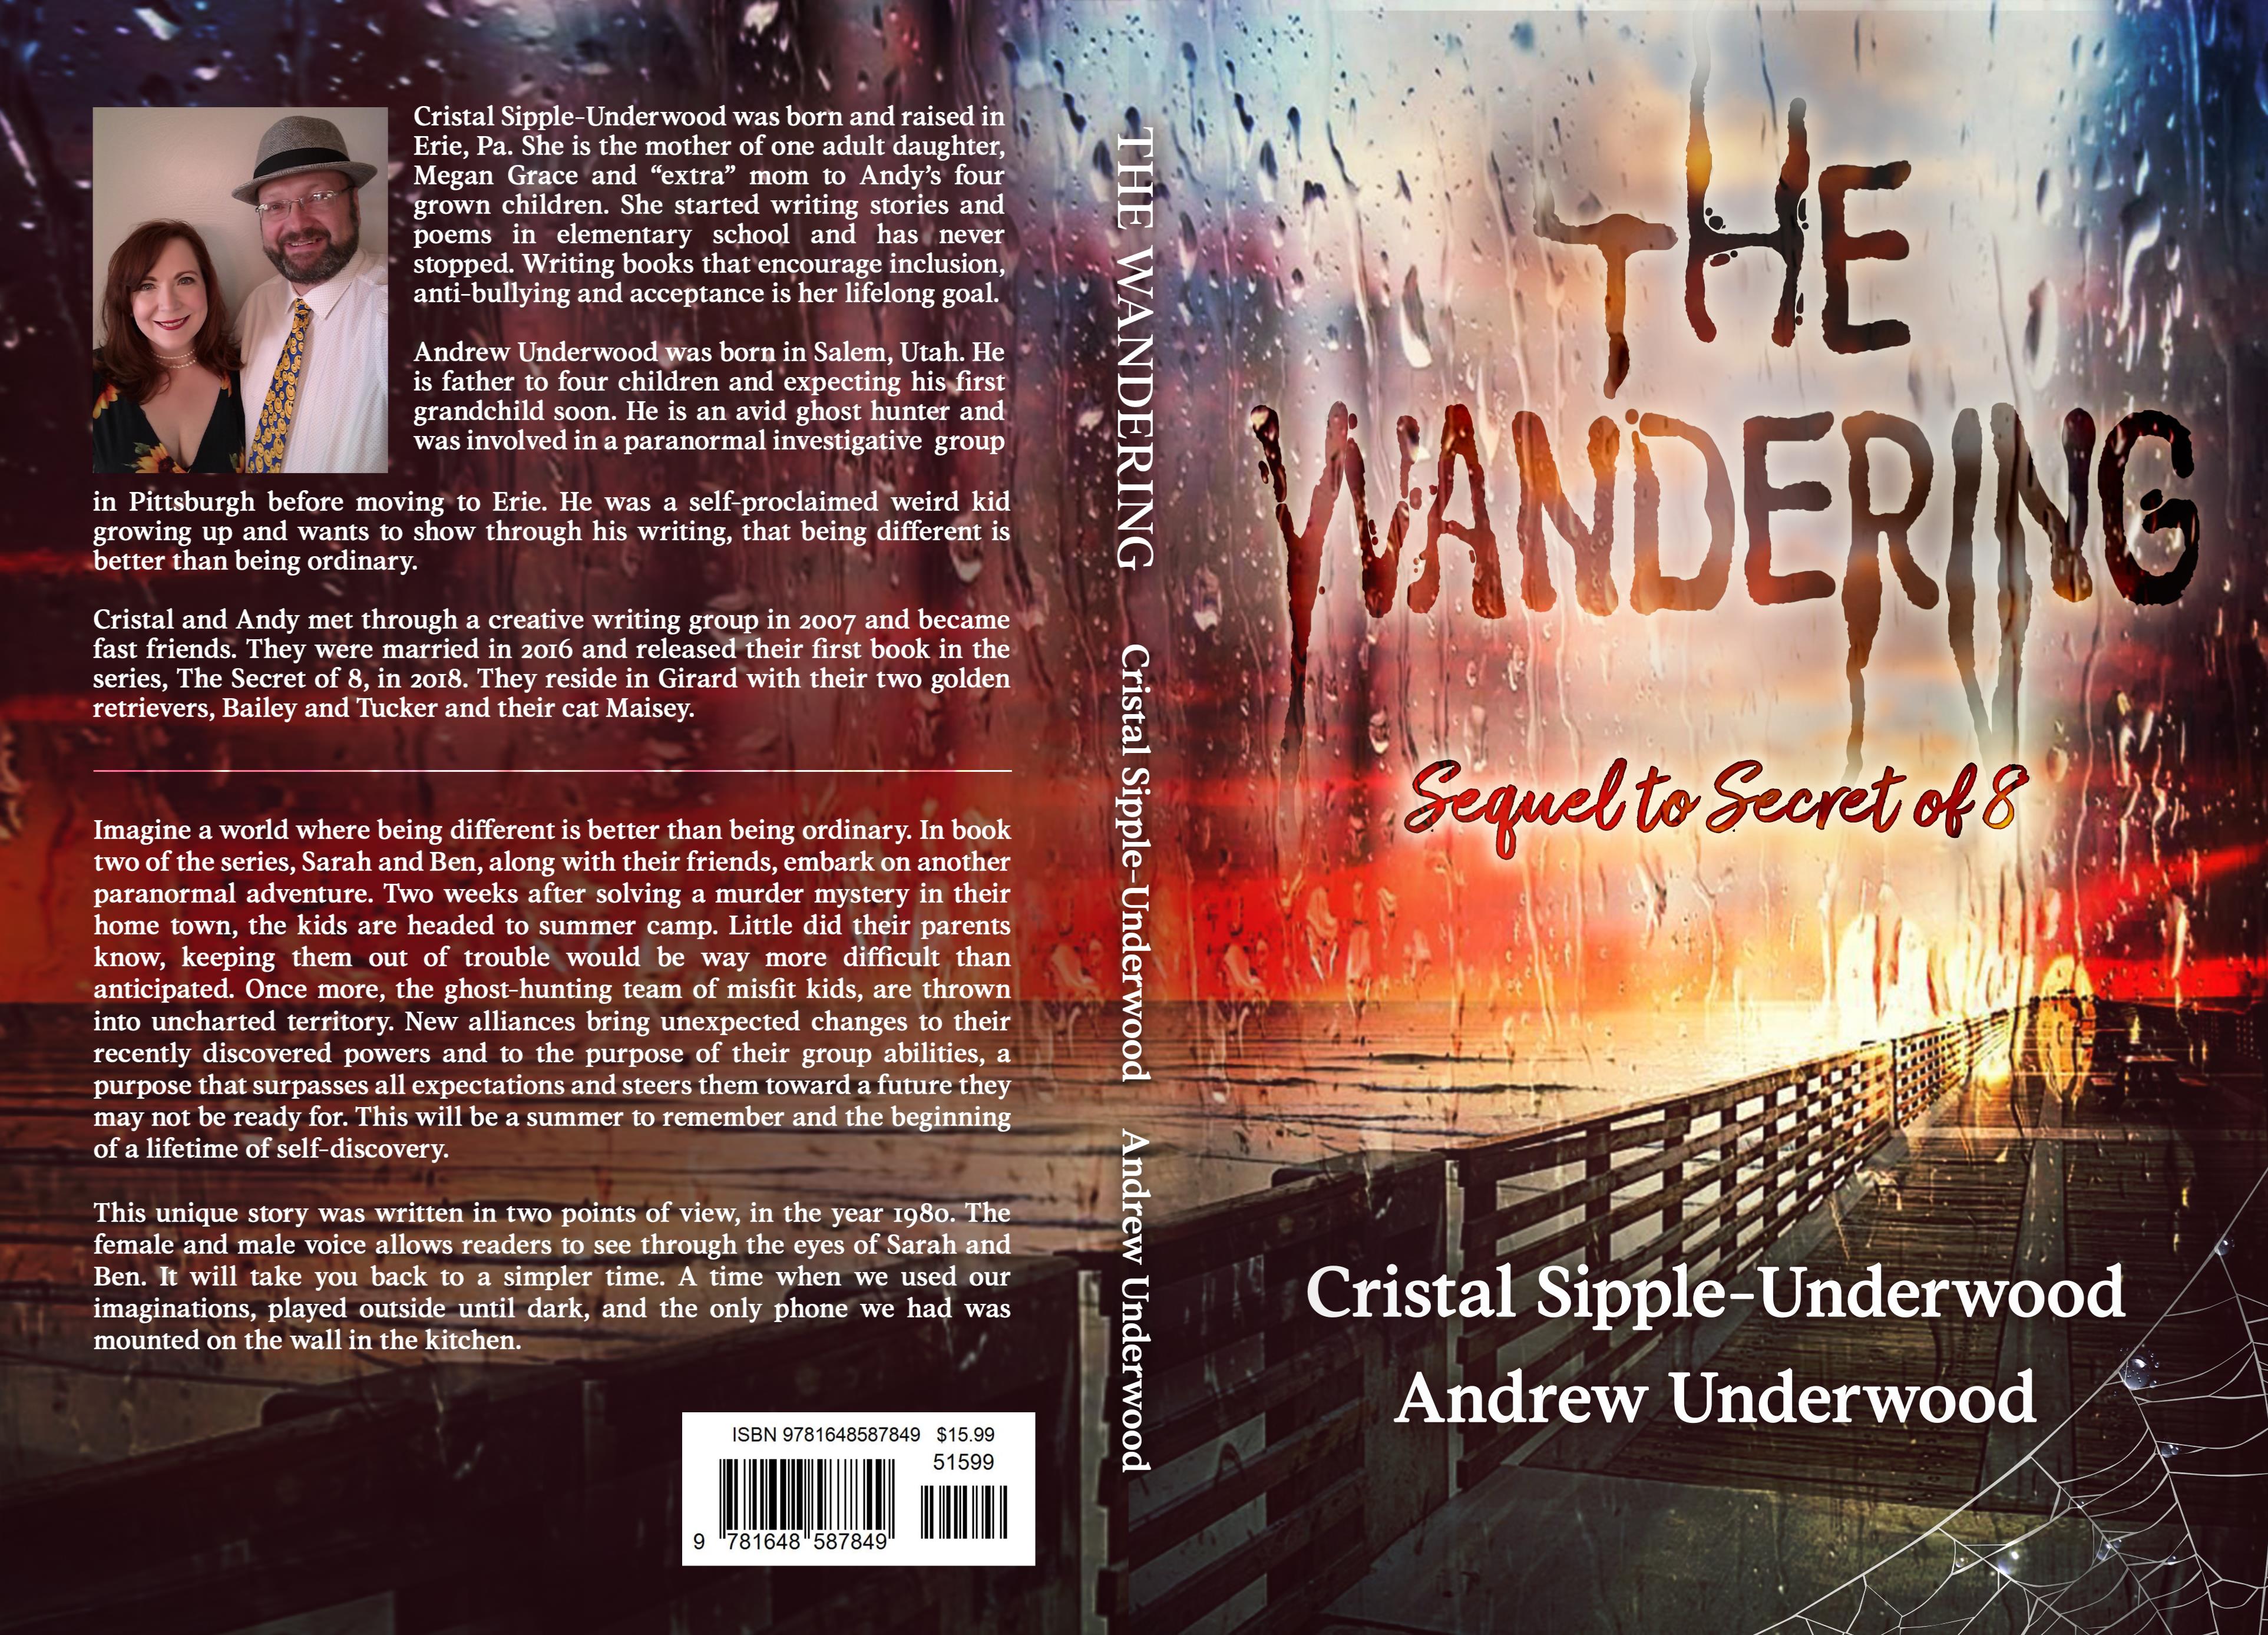 The Wandering cover image